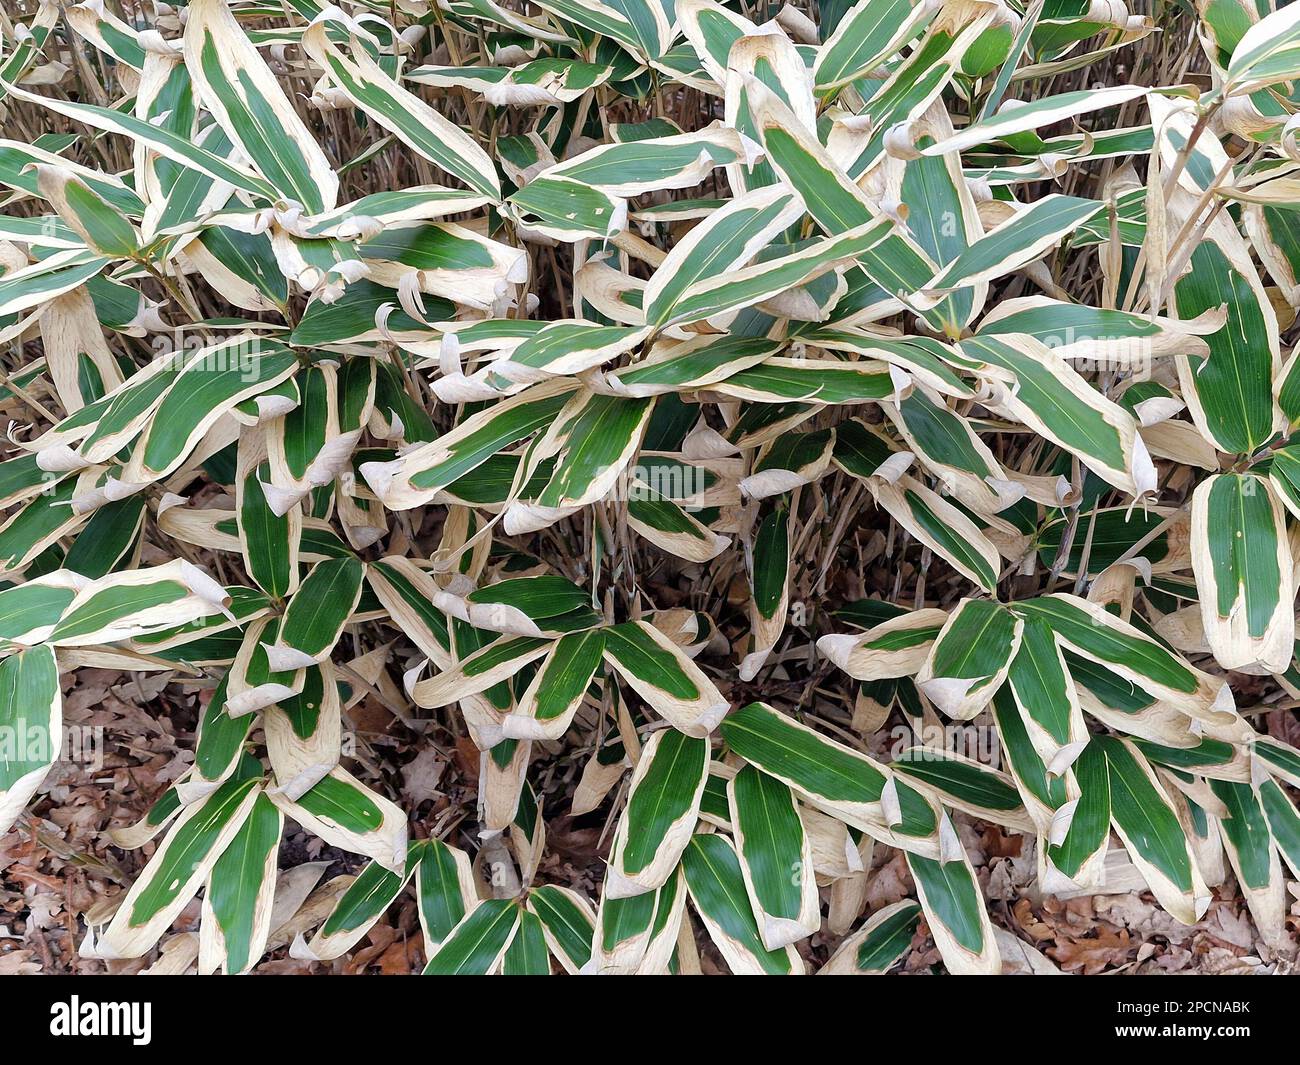 Closeup of the garden plant and bamboo Sasa veitchii with variegated leaves bamboo grass in winter. Stock Photo